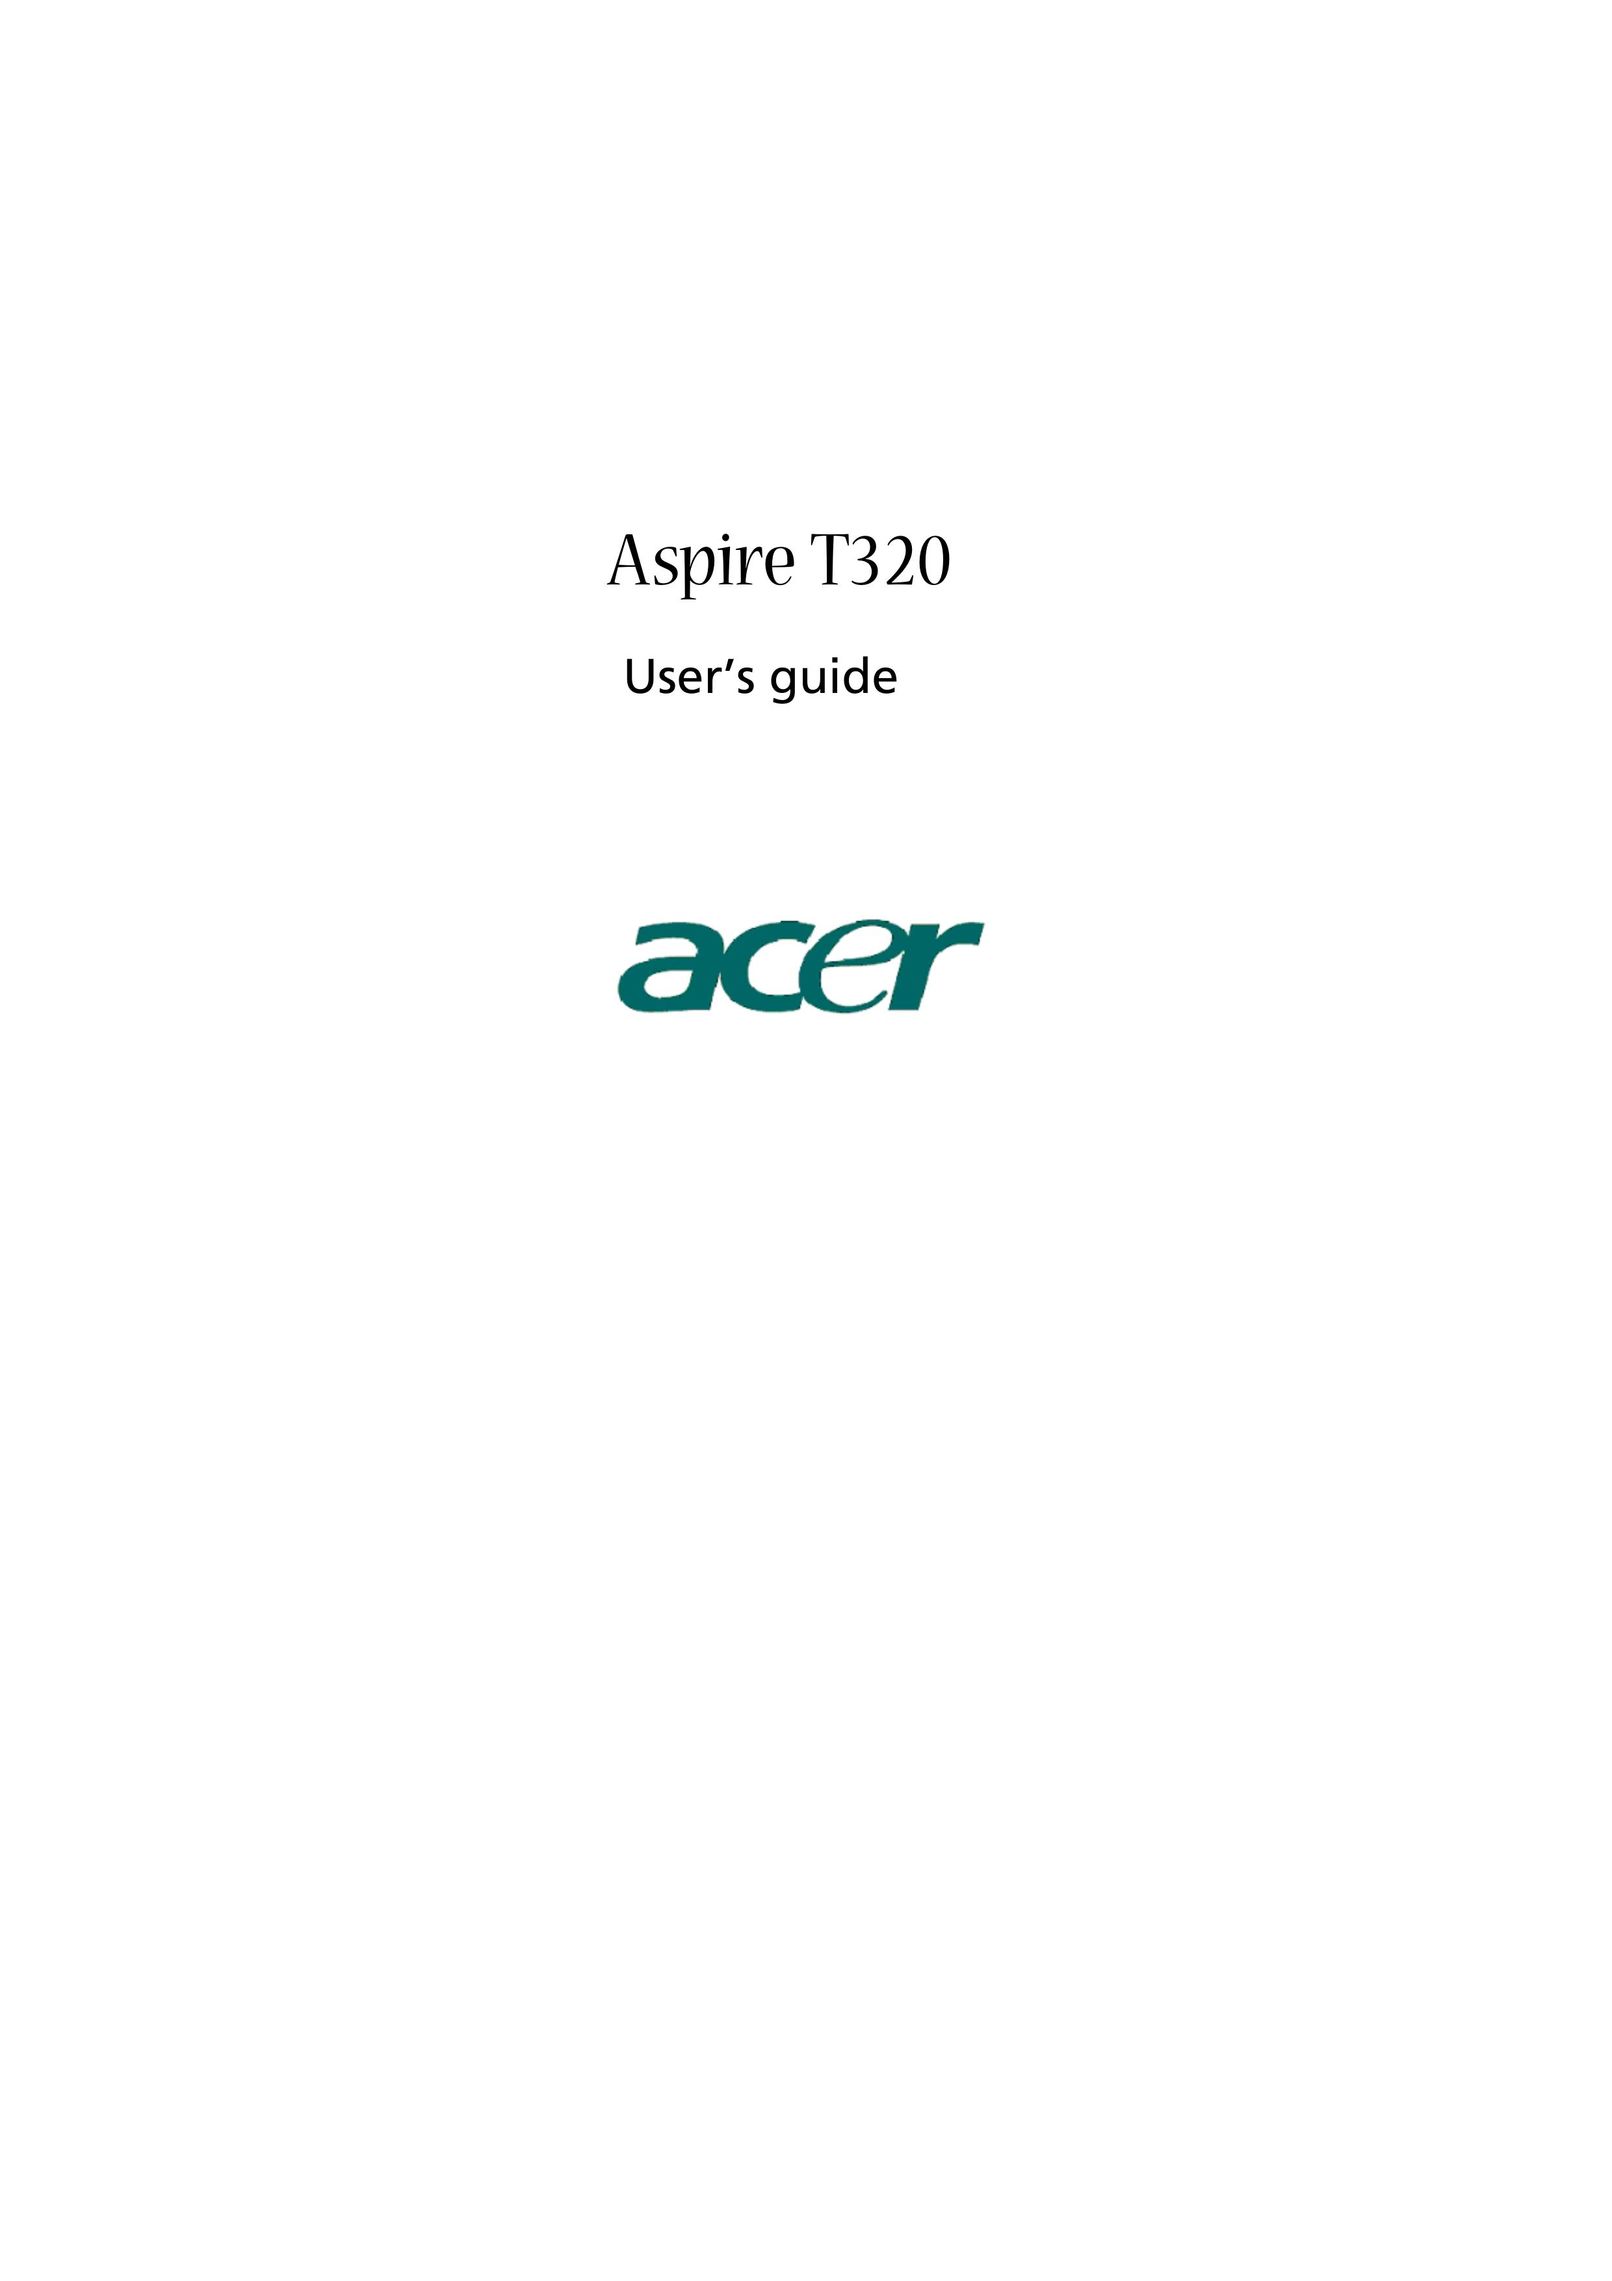 Acer Aspire T320 Personal Computer User Manual